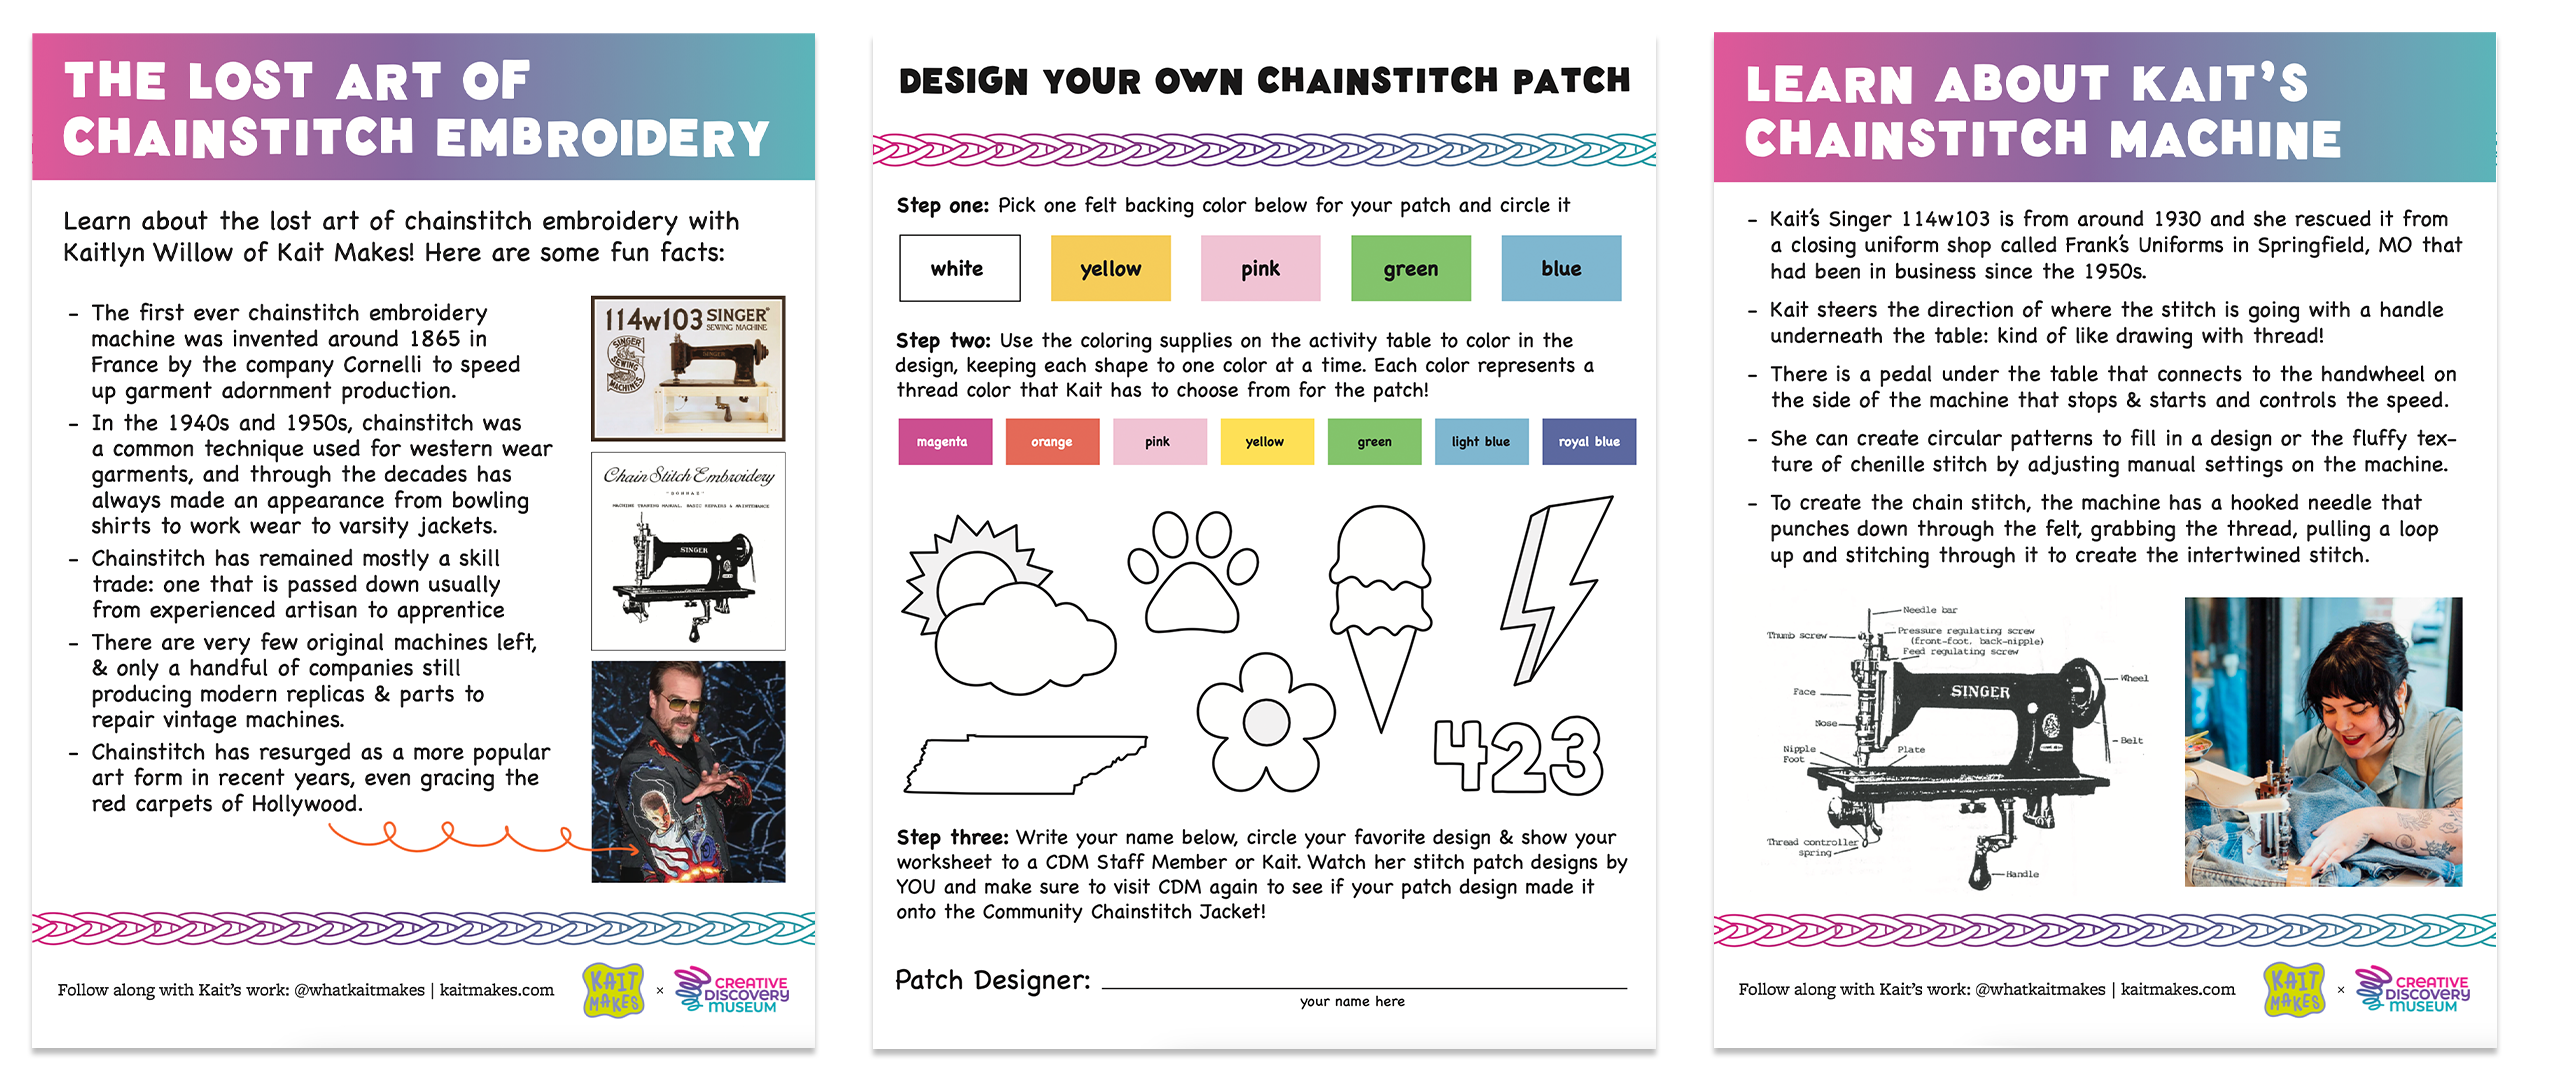 Creative Discovery Museum Chainstitch patch design sheets history of chainstitch and how kait's machine works